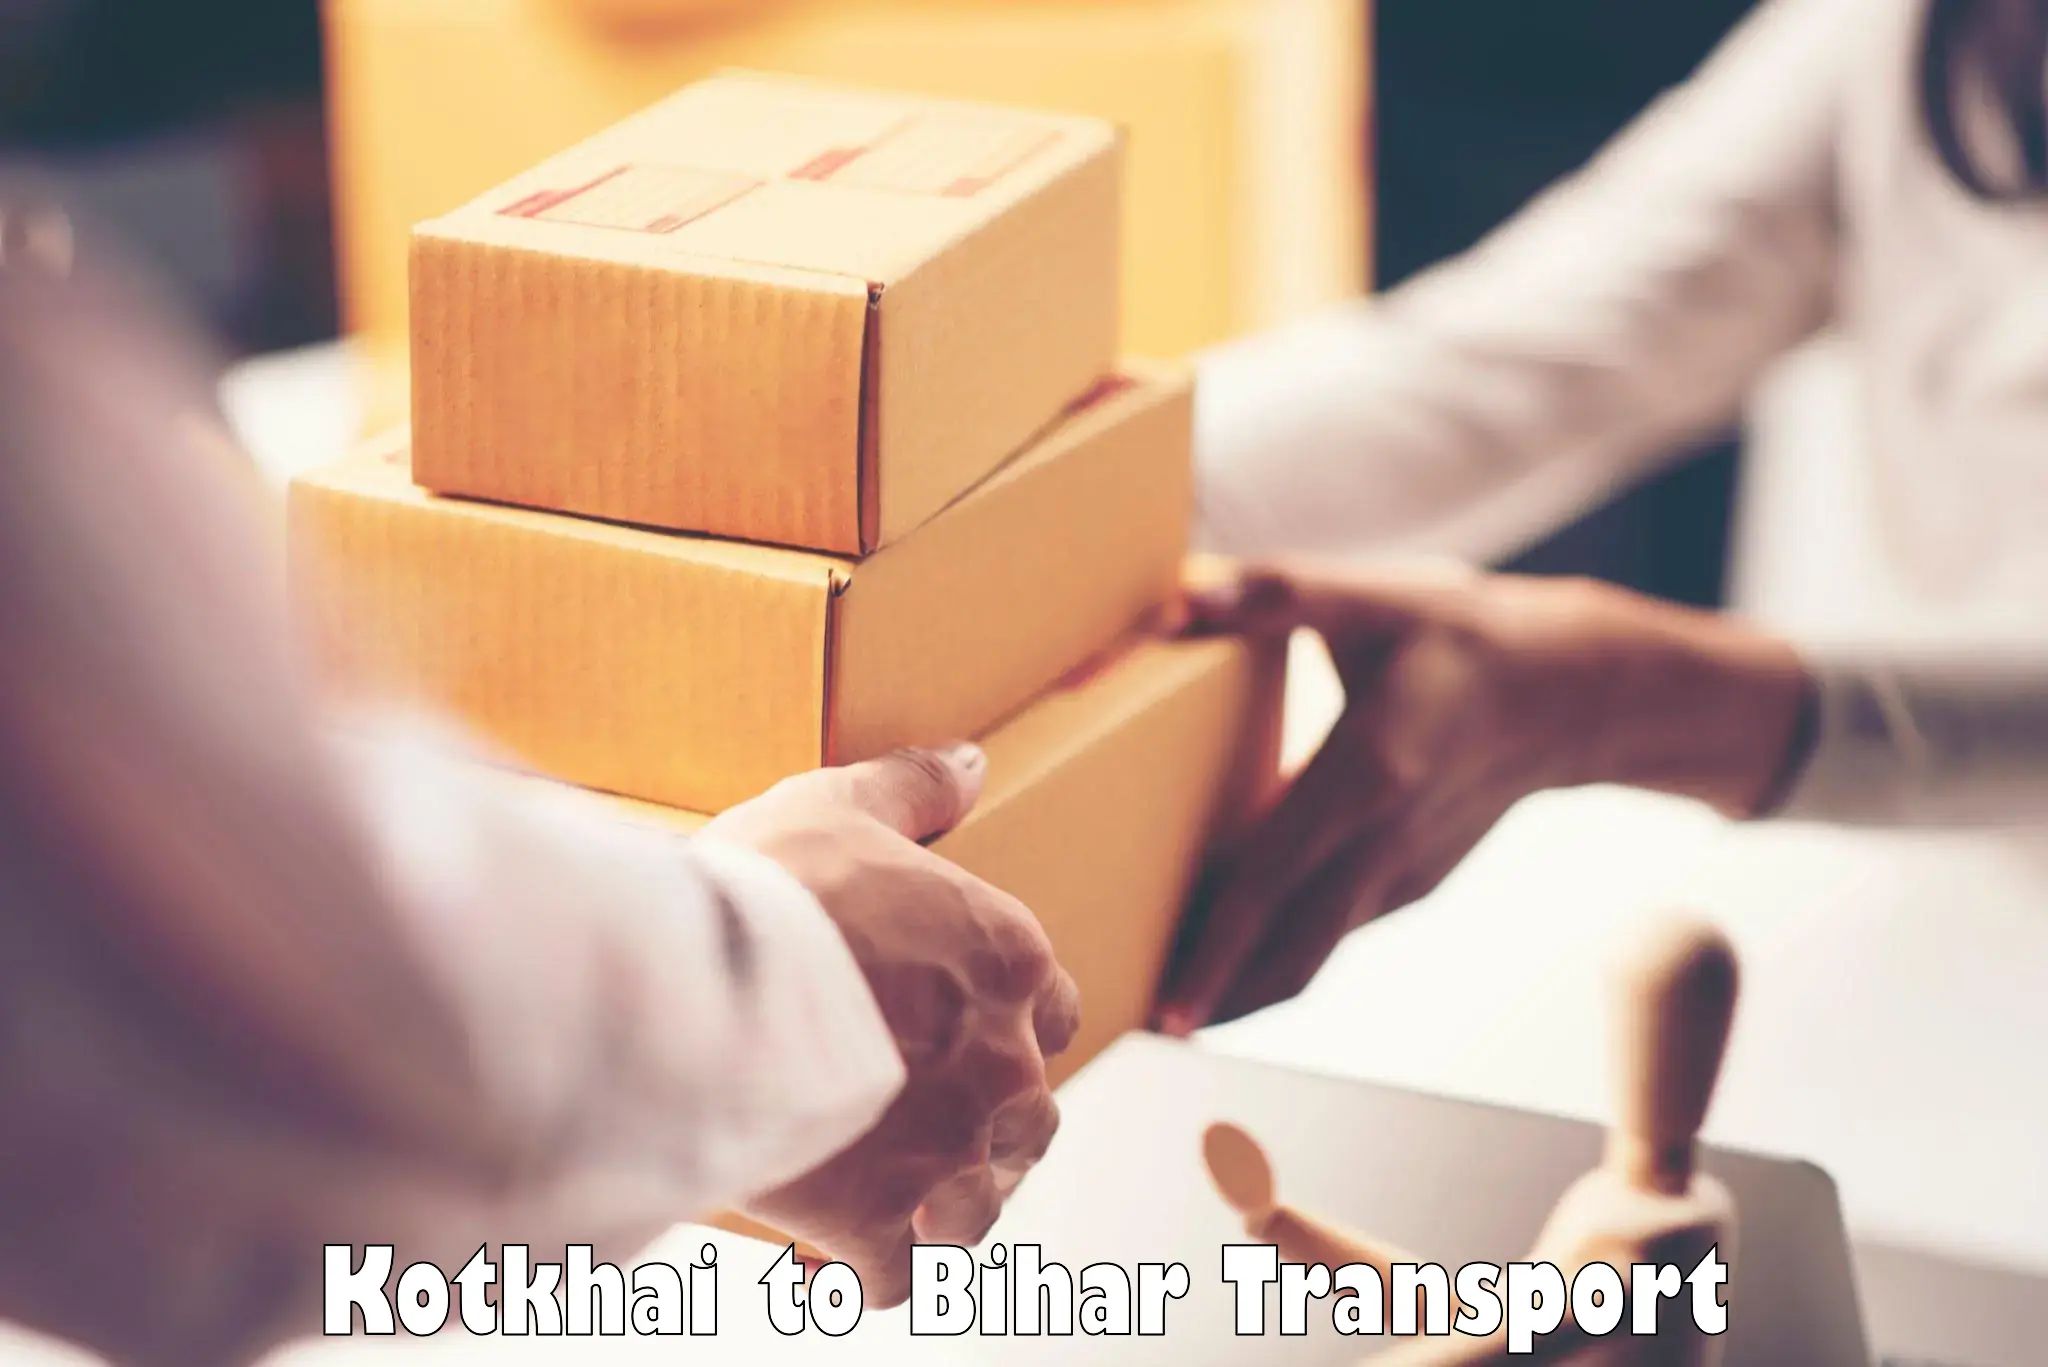 Truck transport companies in India Kotkhai to Kamtaul